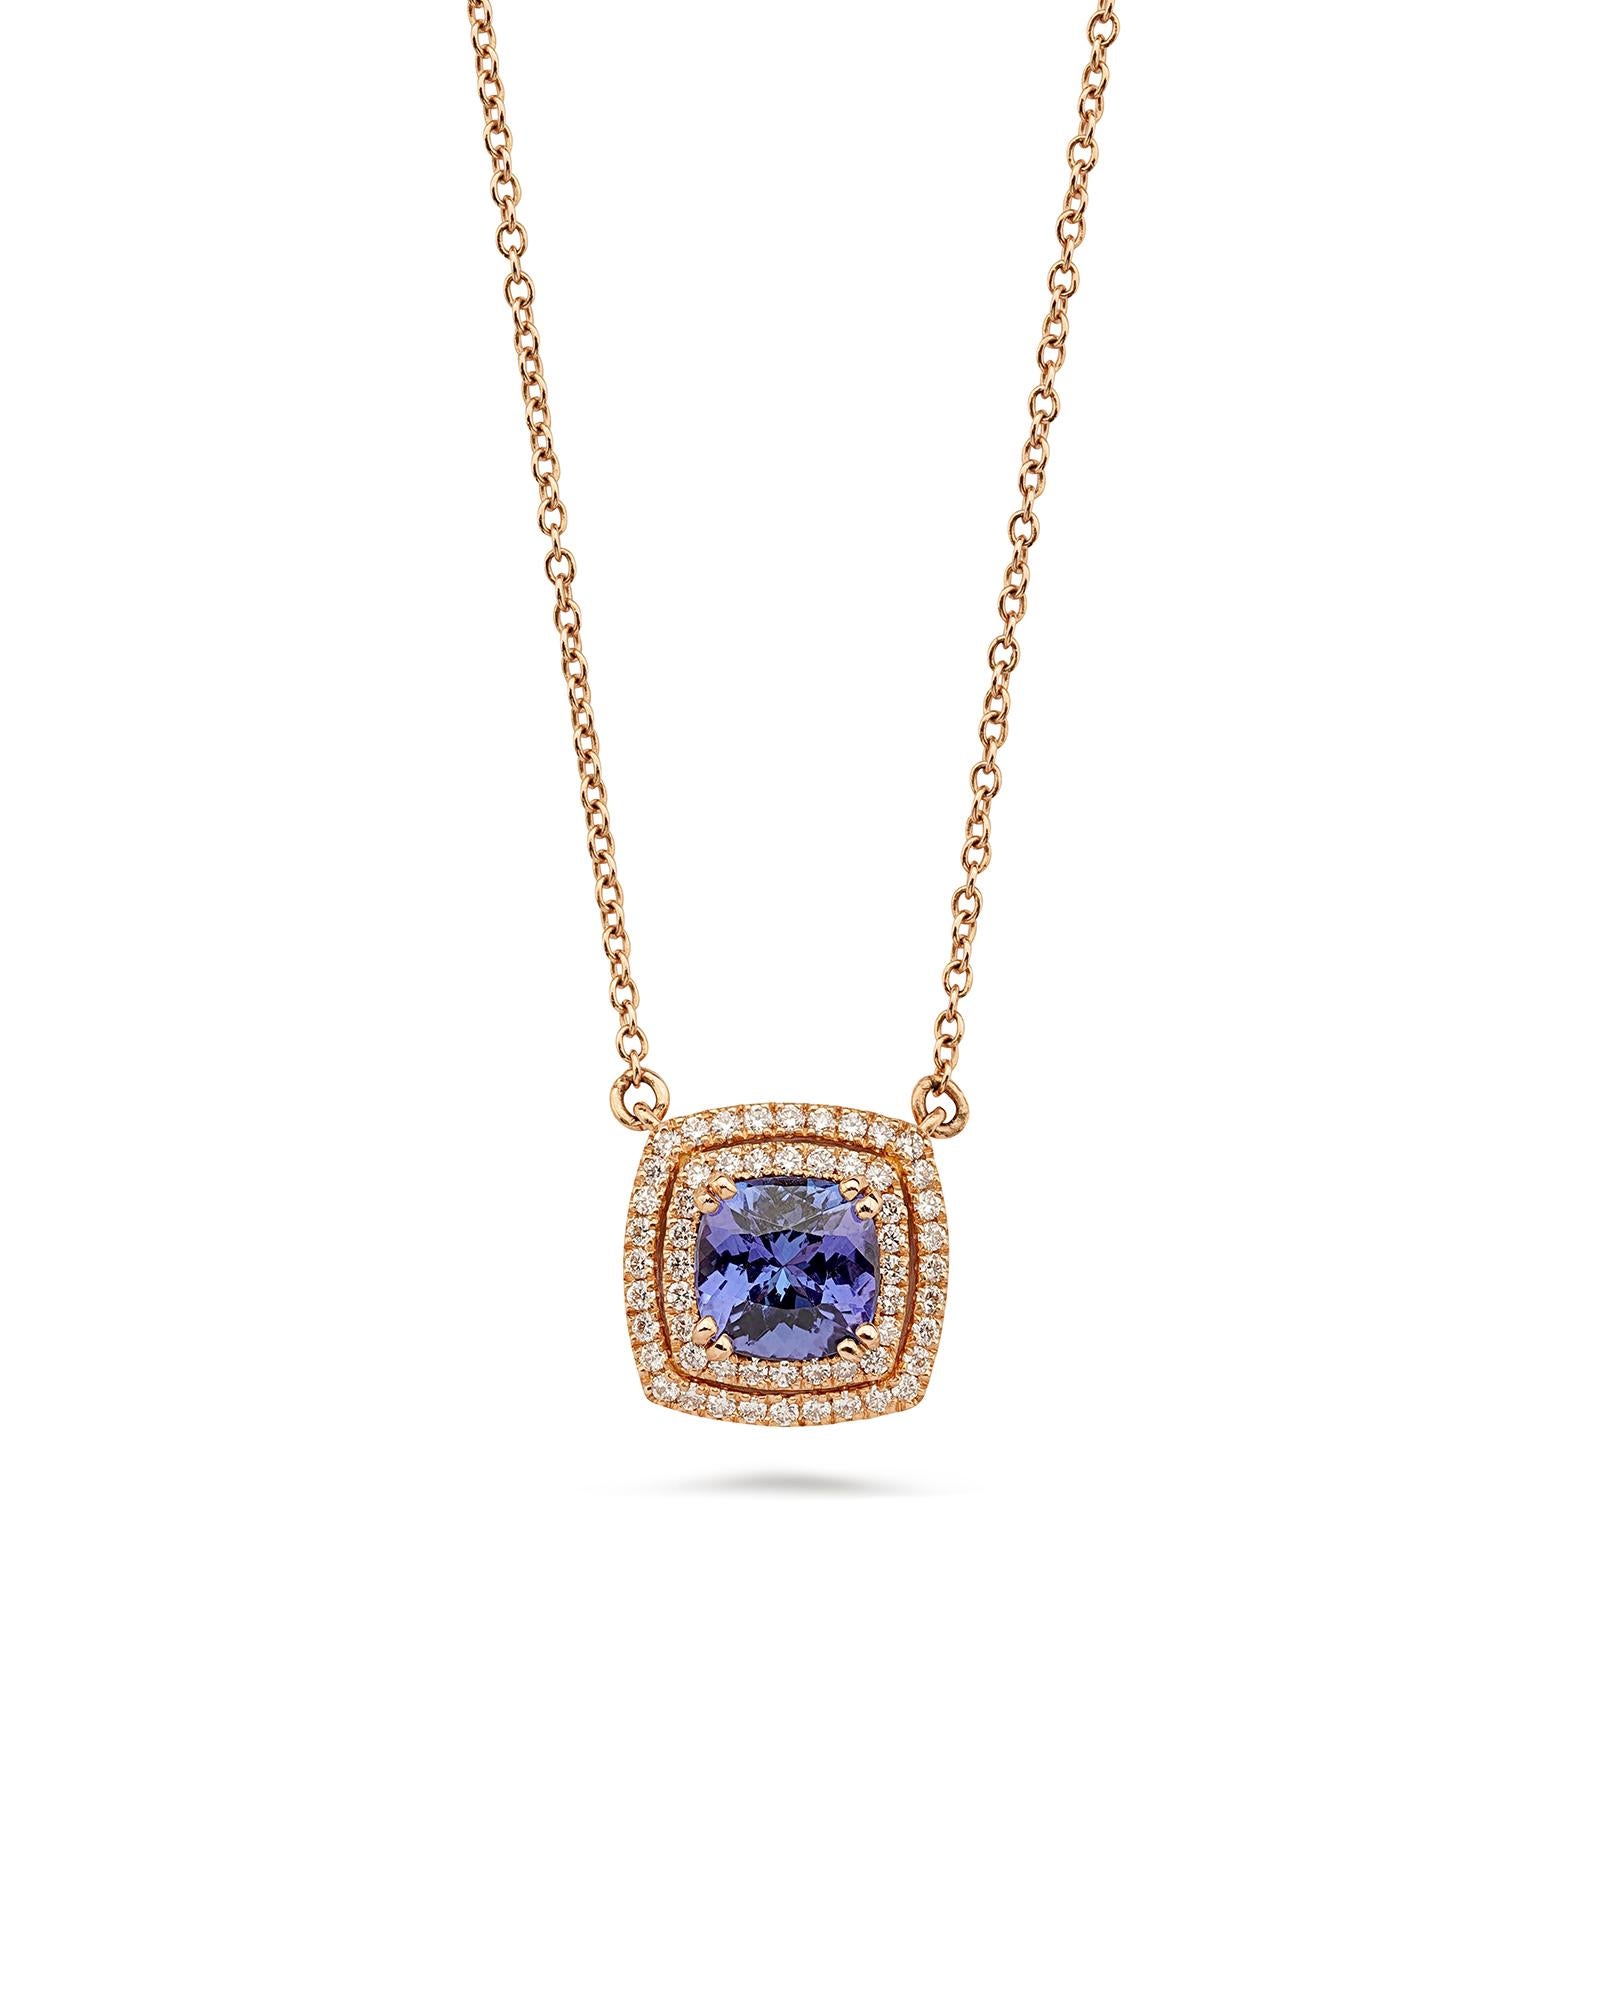 The pendant necklace from the Pure Harmony collection is made of rose gold and embellished with diamonds and a magnificent tanzanite.
The element that distinguishes this jewel, in combination with the earrings of this collection, is the double ring